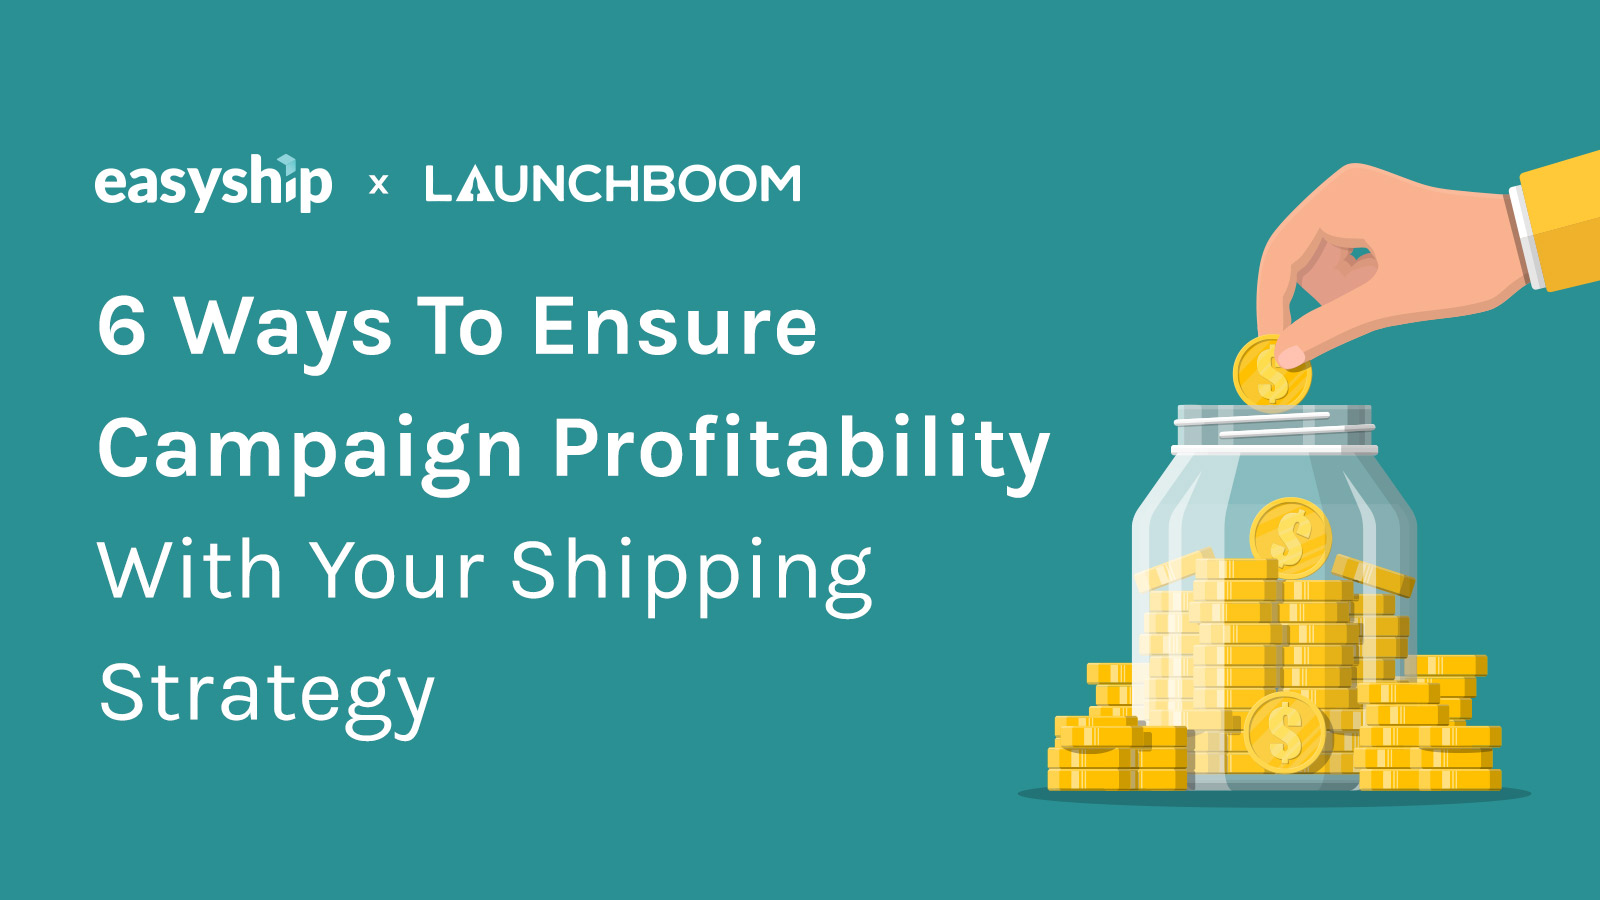 6 ways to ensure campaign profitability with your shipping strategy